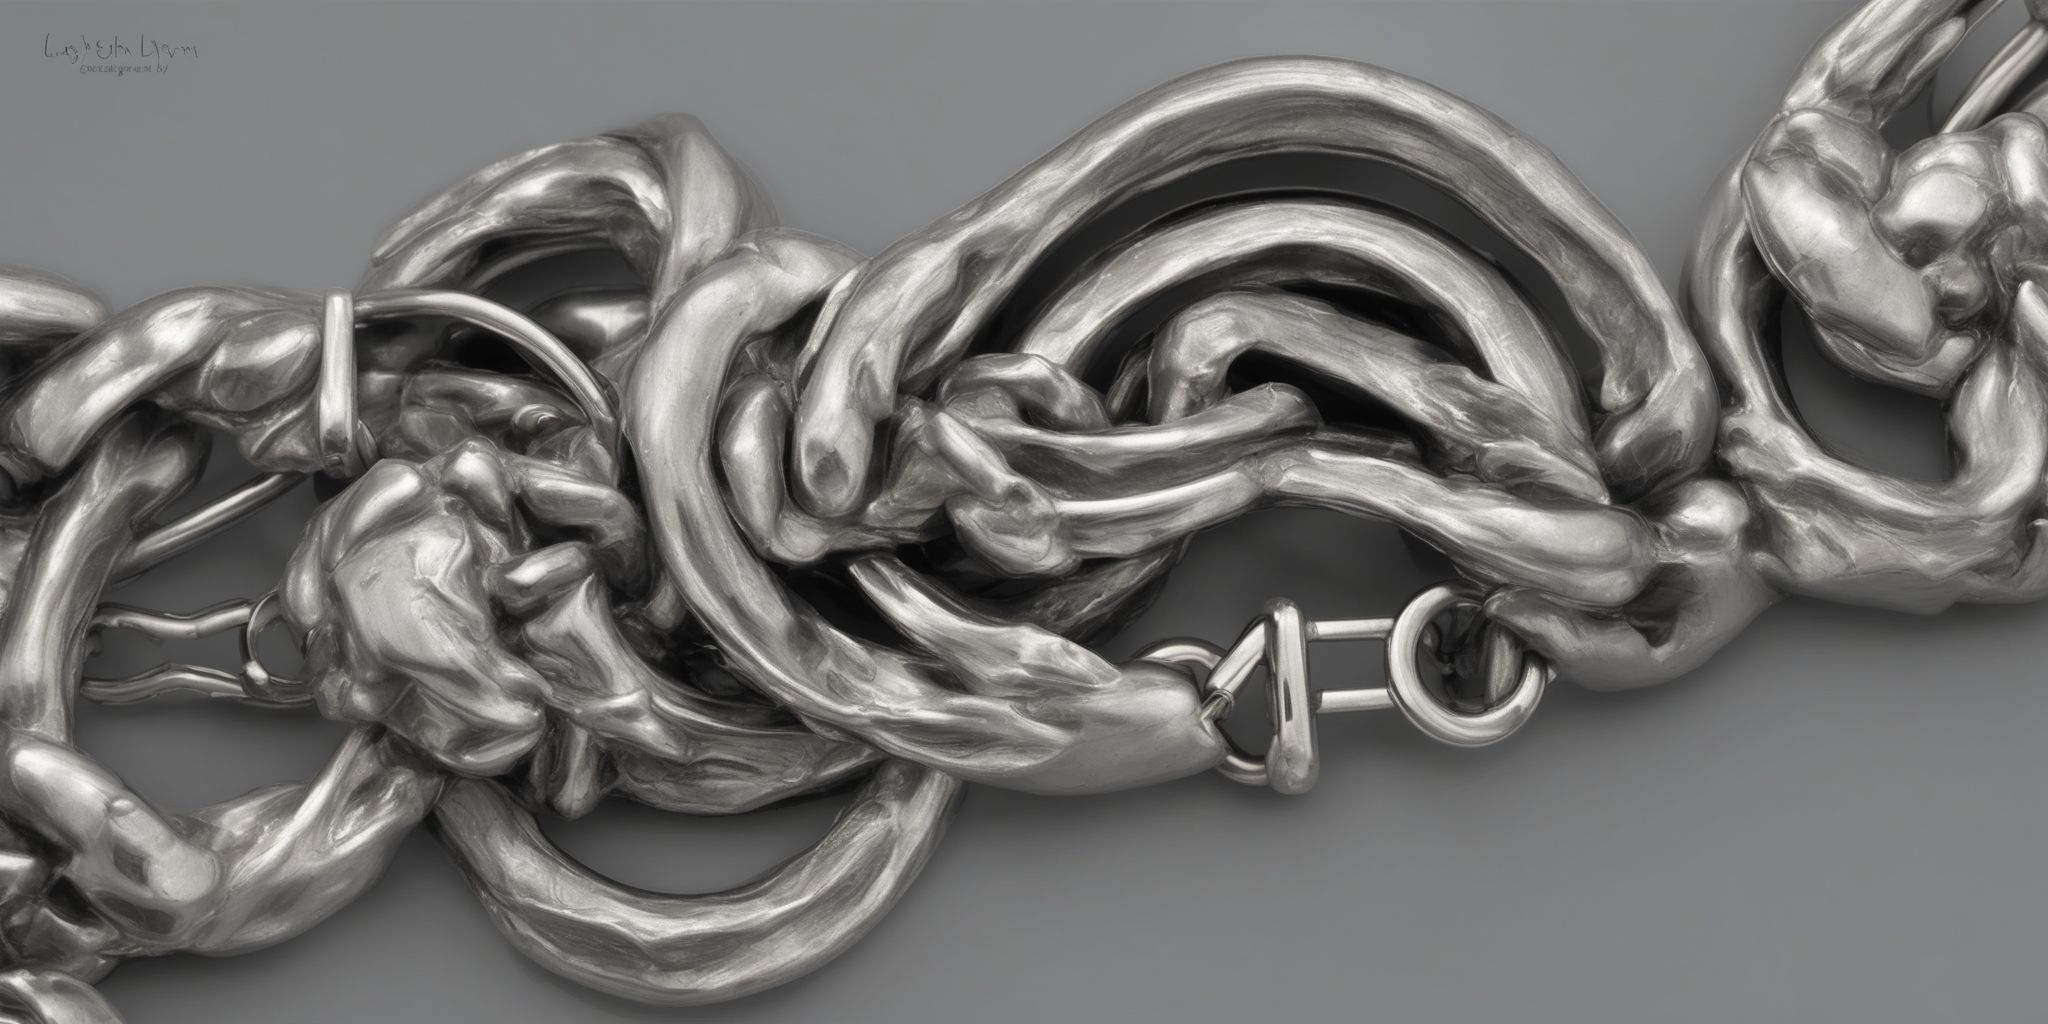 Clasp  in realistic, photographic style